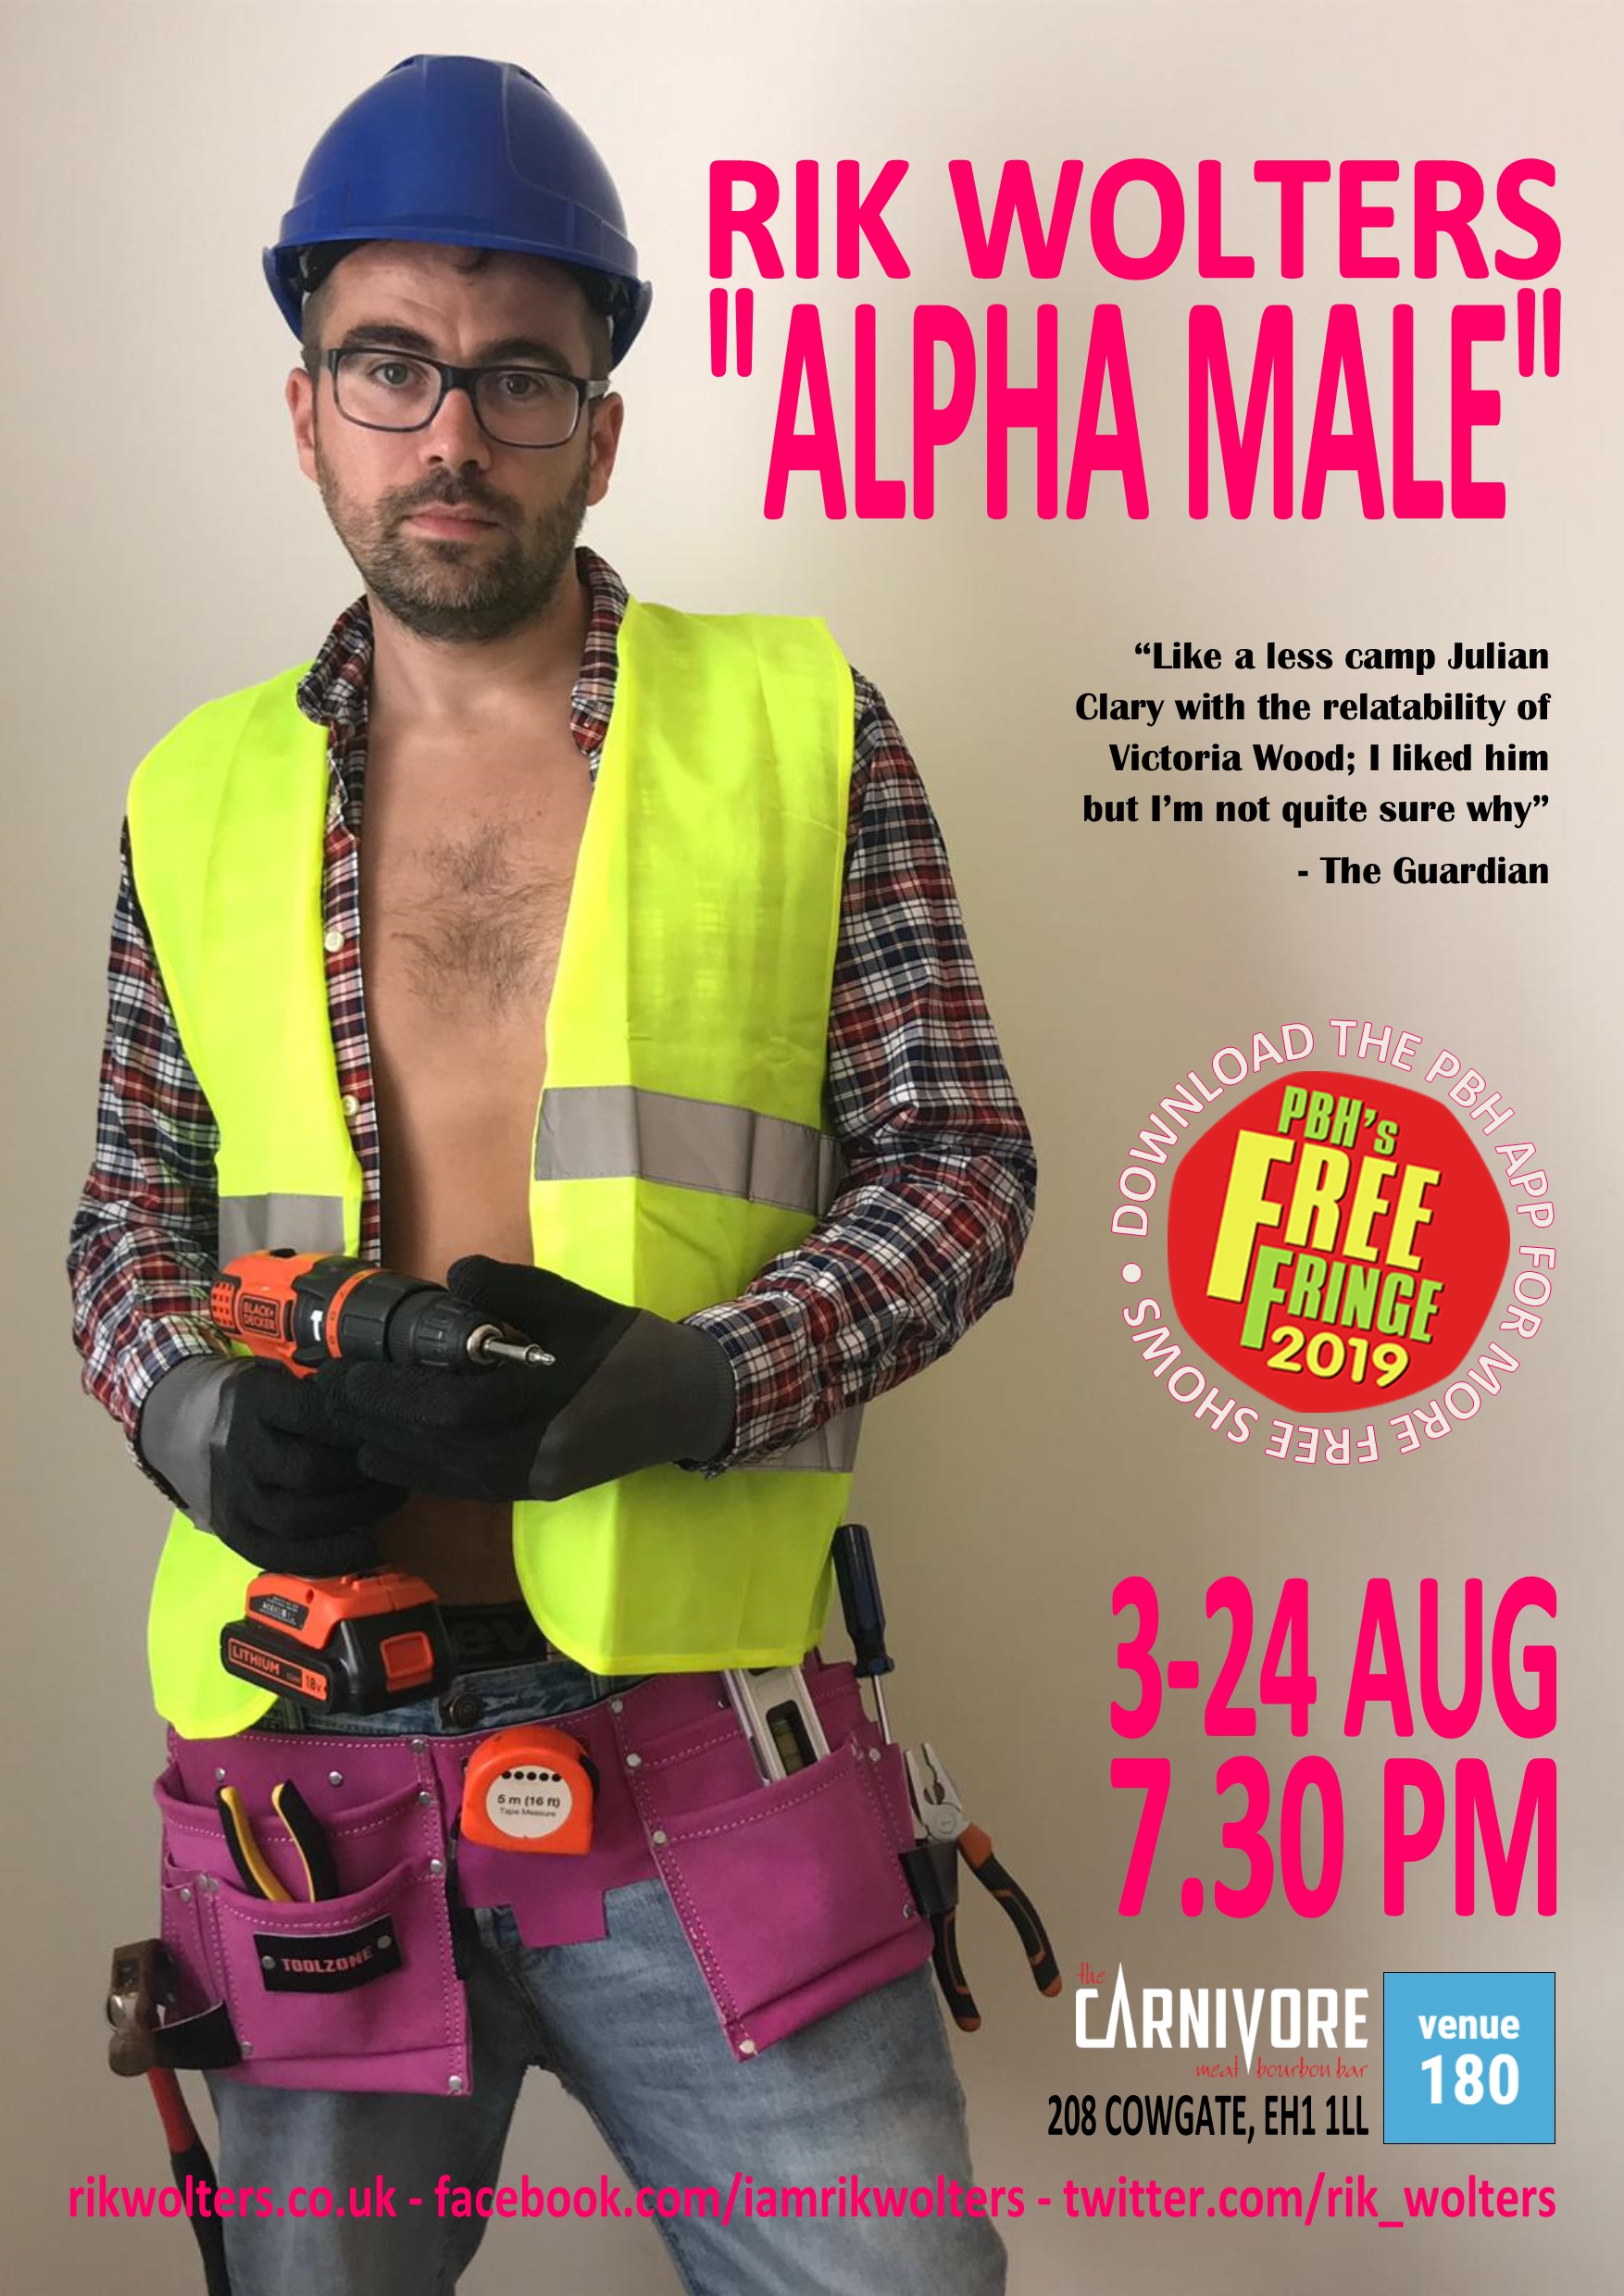 The poster for Rik Wolters - Alpha Male